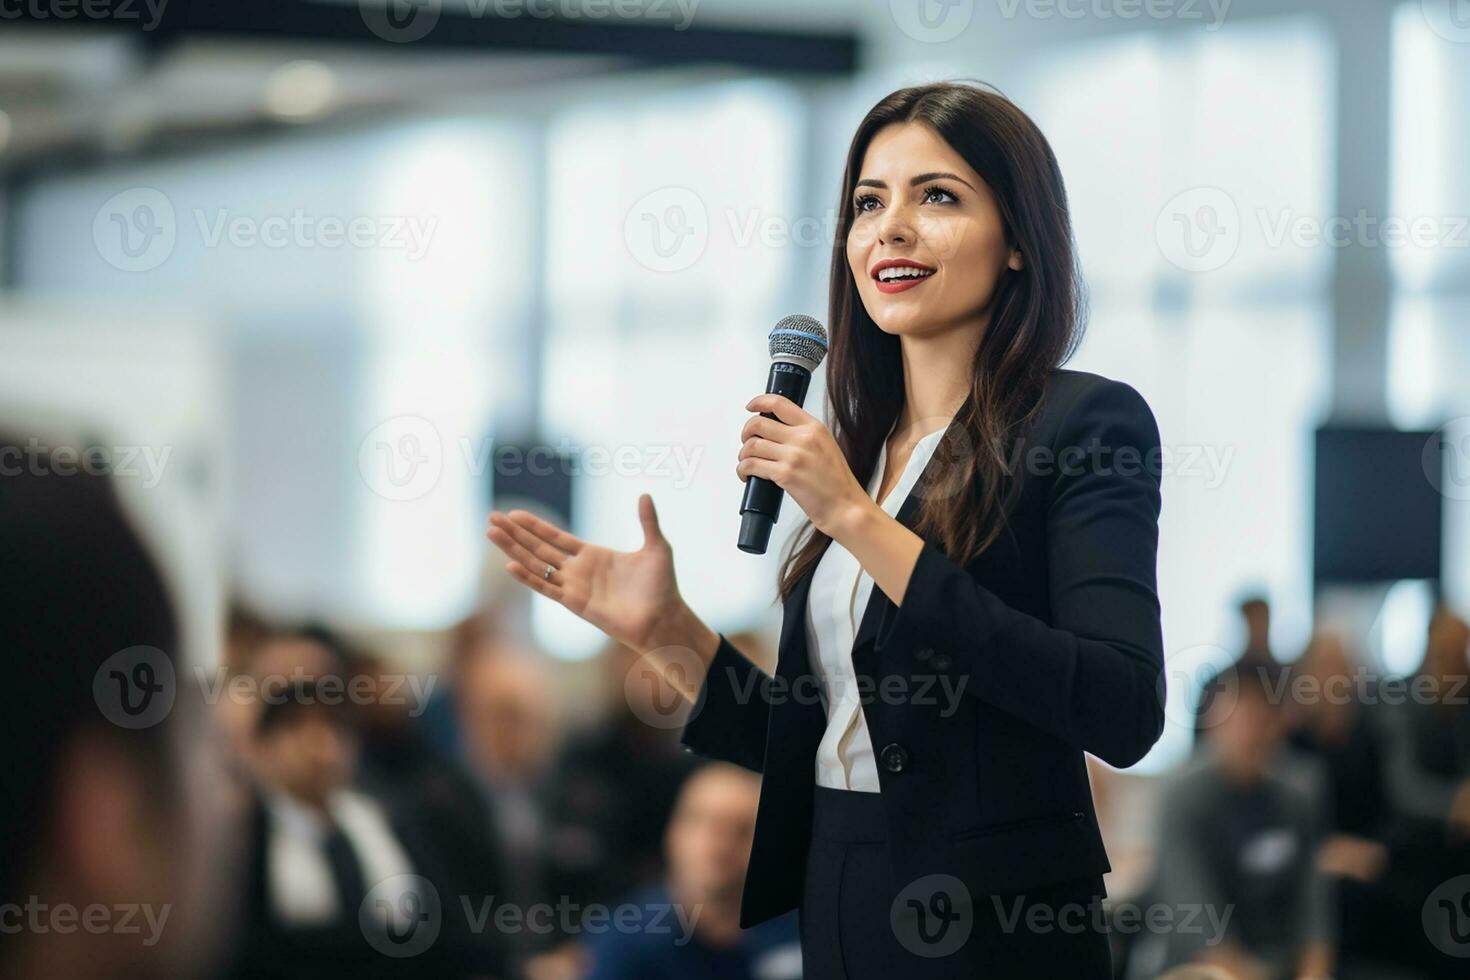 AI generated Female speaker giving a talk on corporate business conference. Unrecognizable people in audience at conference hall. Business and Entrepreneurship event photo